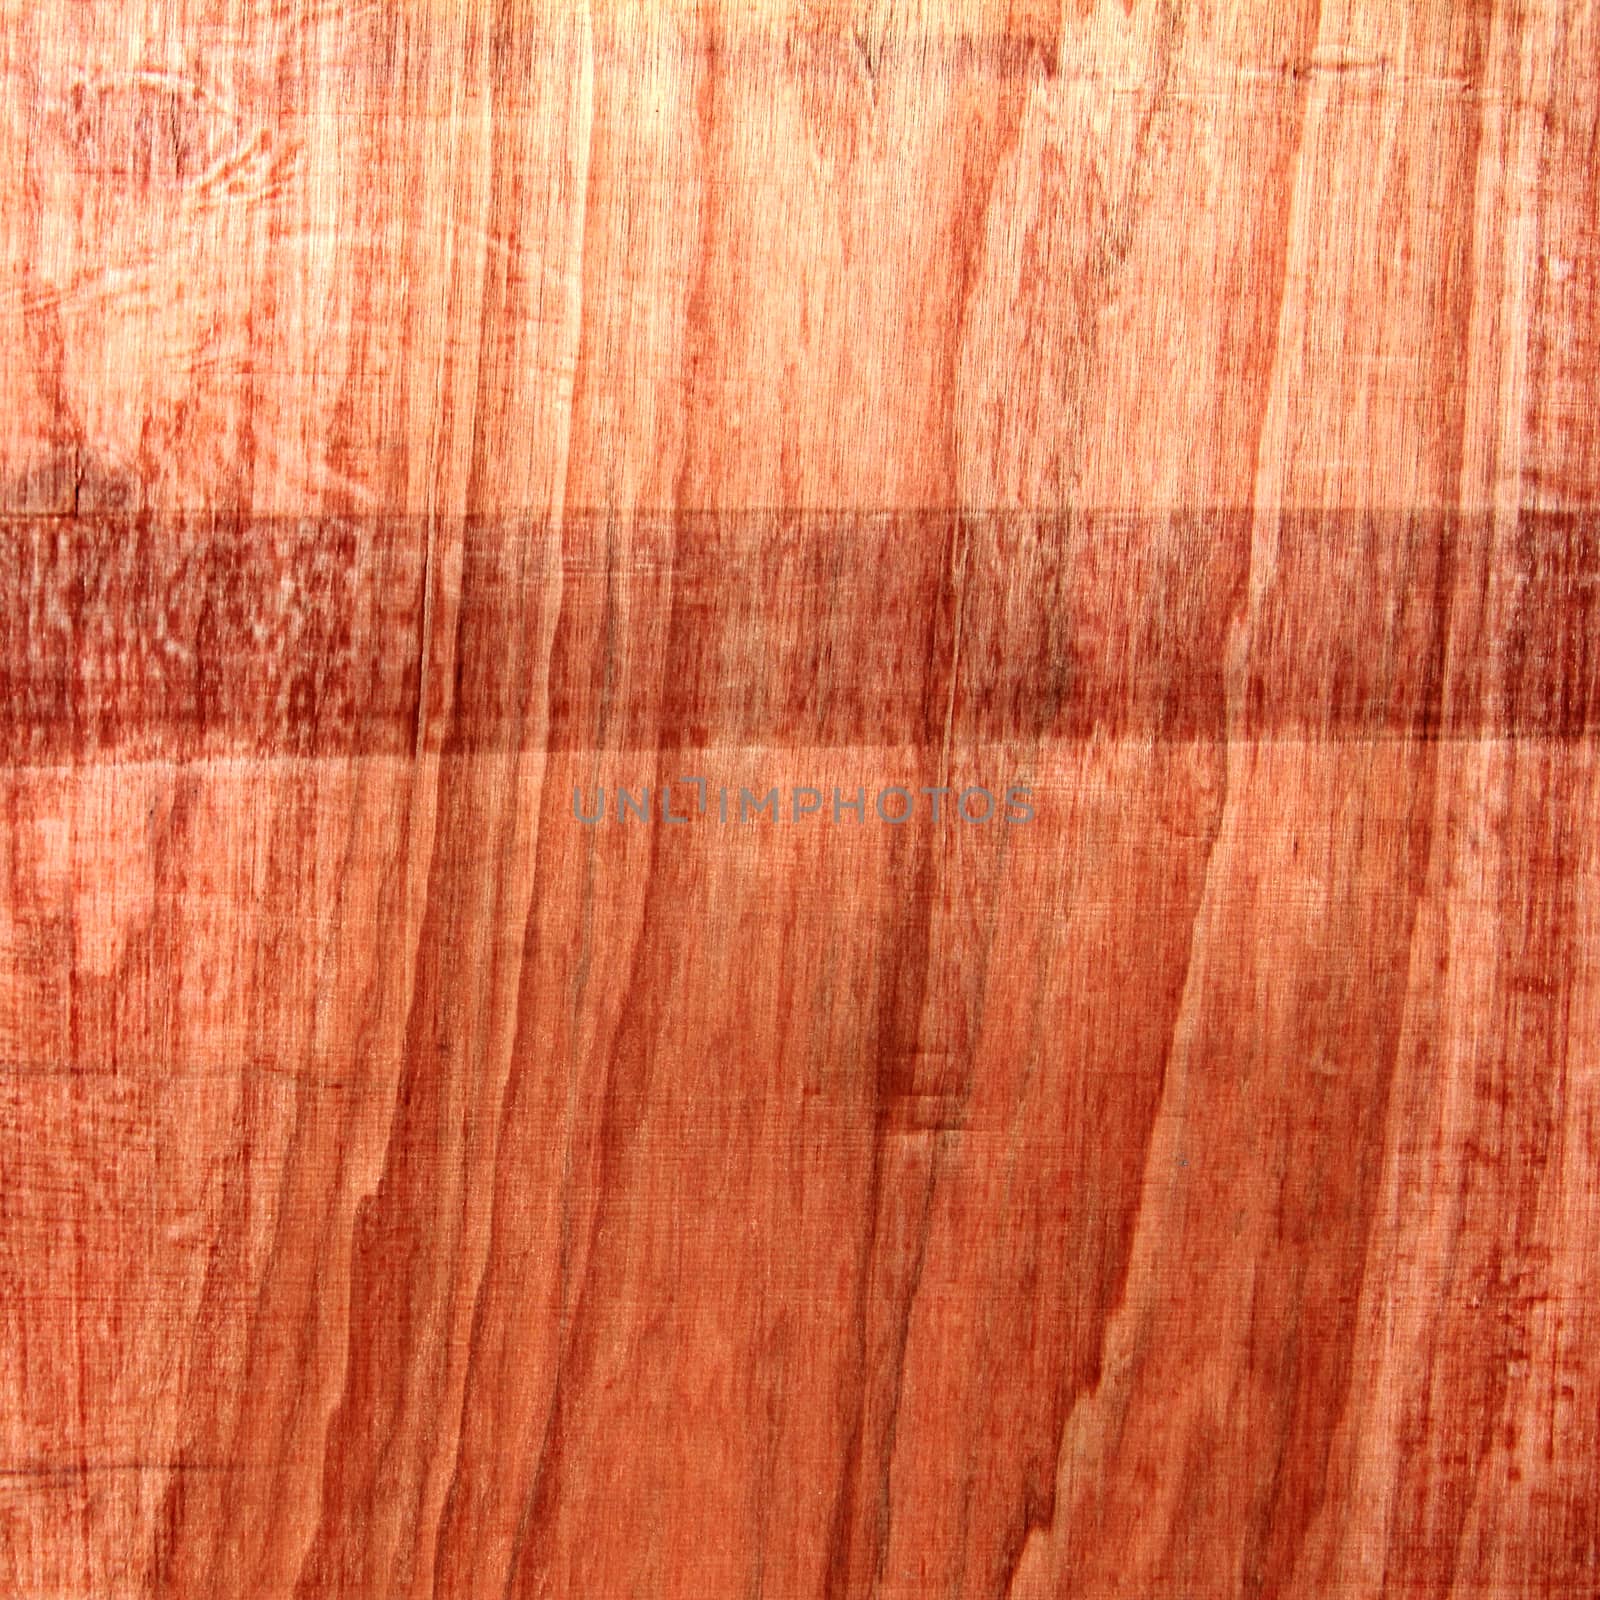 Detail of wood texture for background